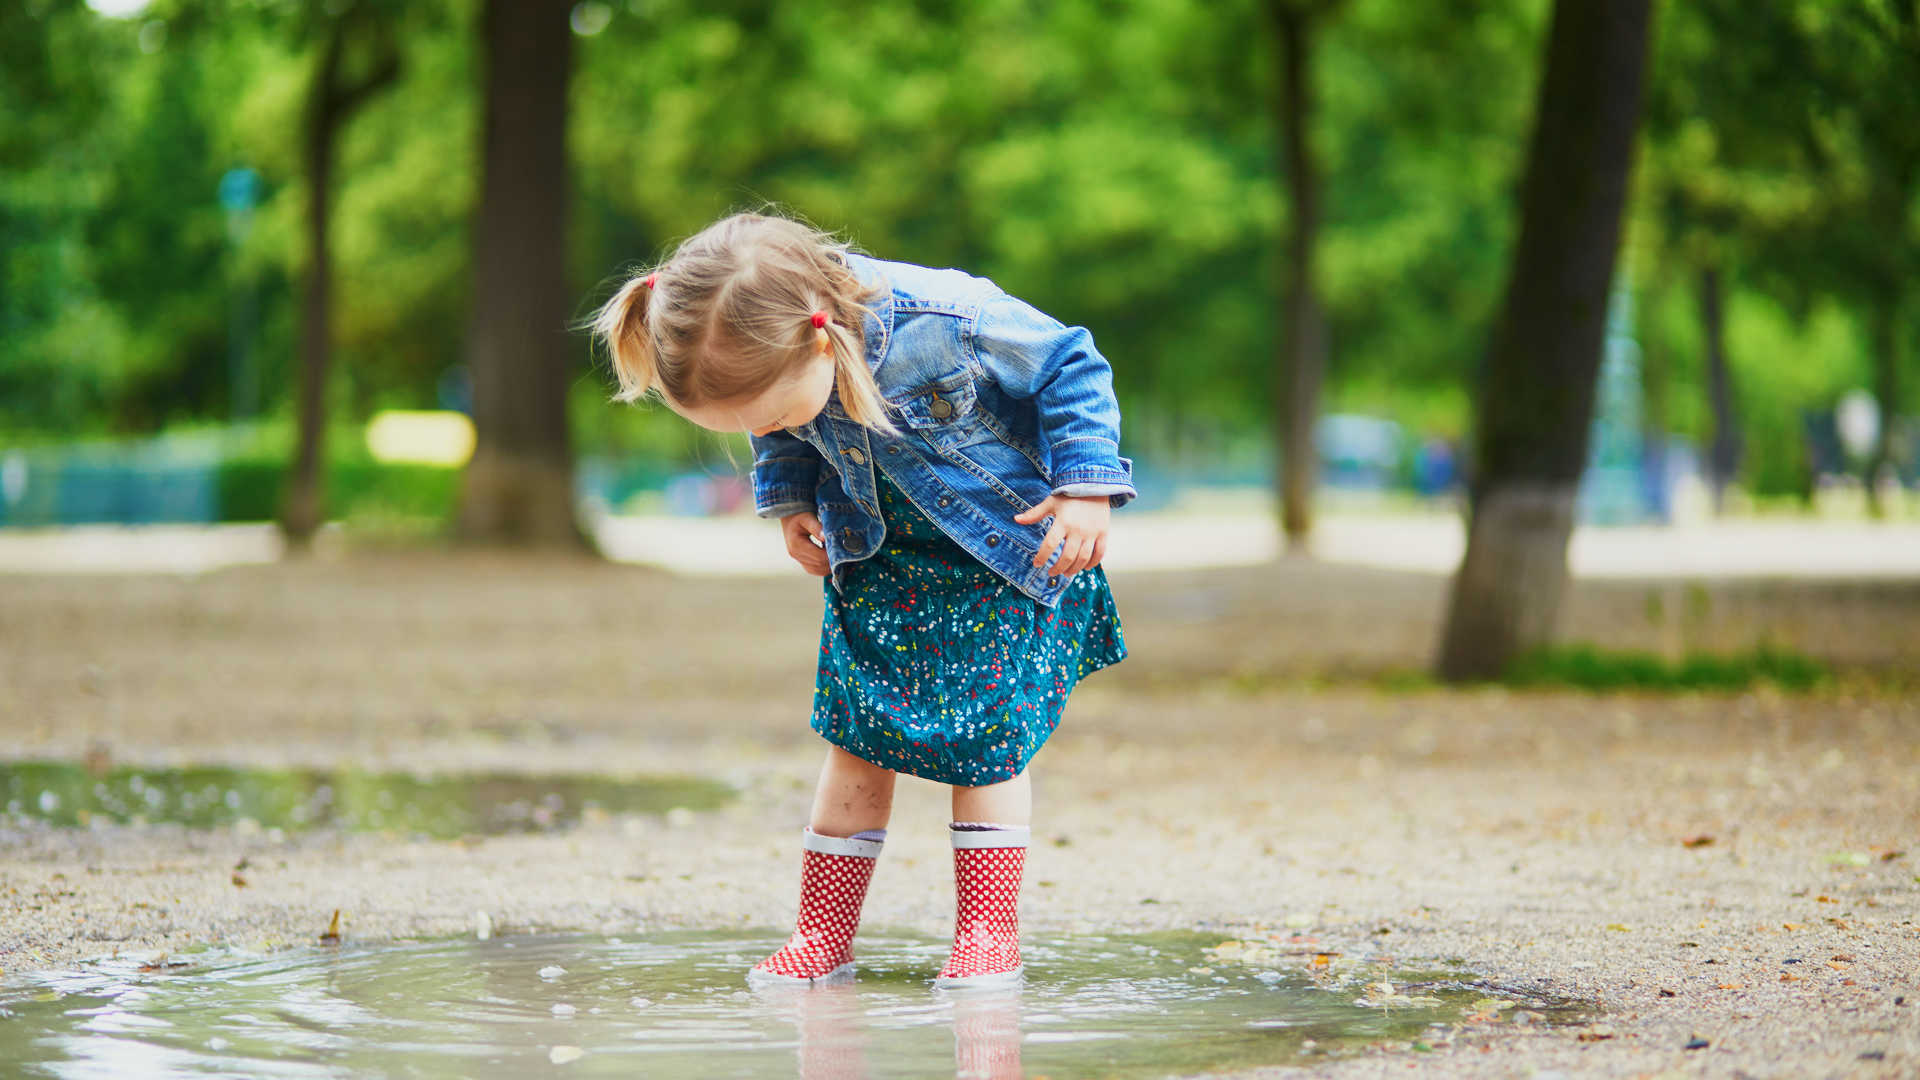 Remove mud stains – Little girl standing in a muddy puddle